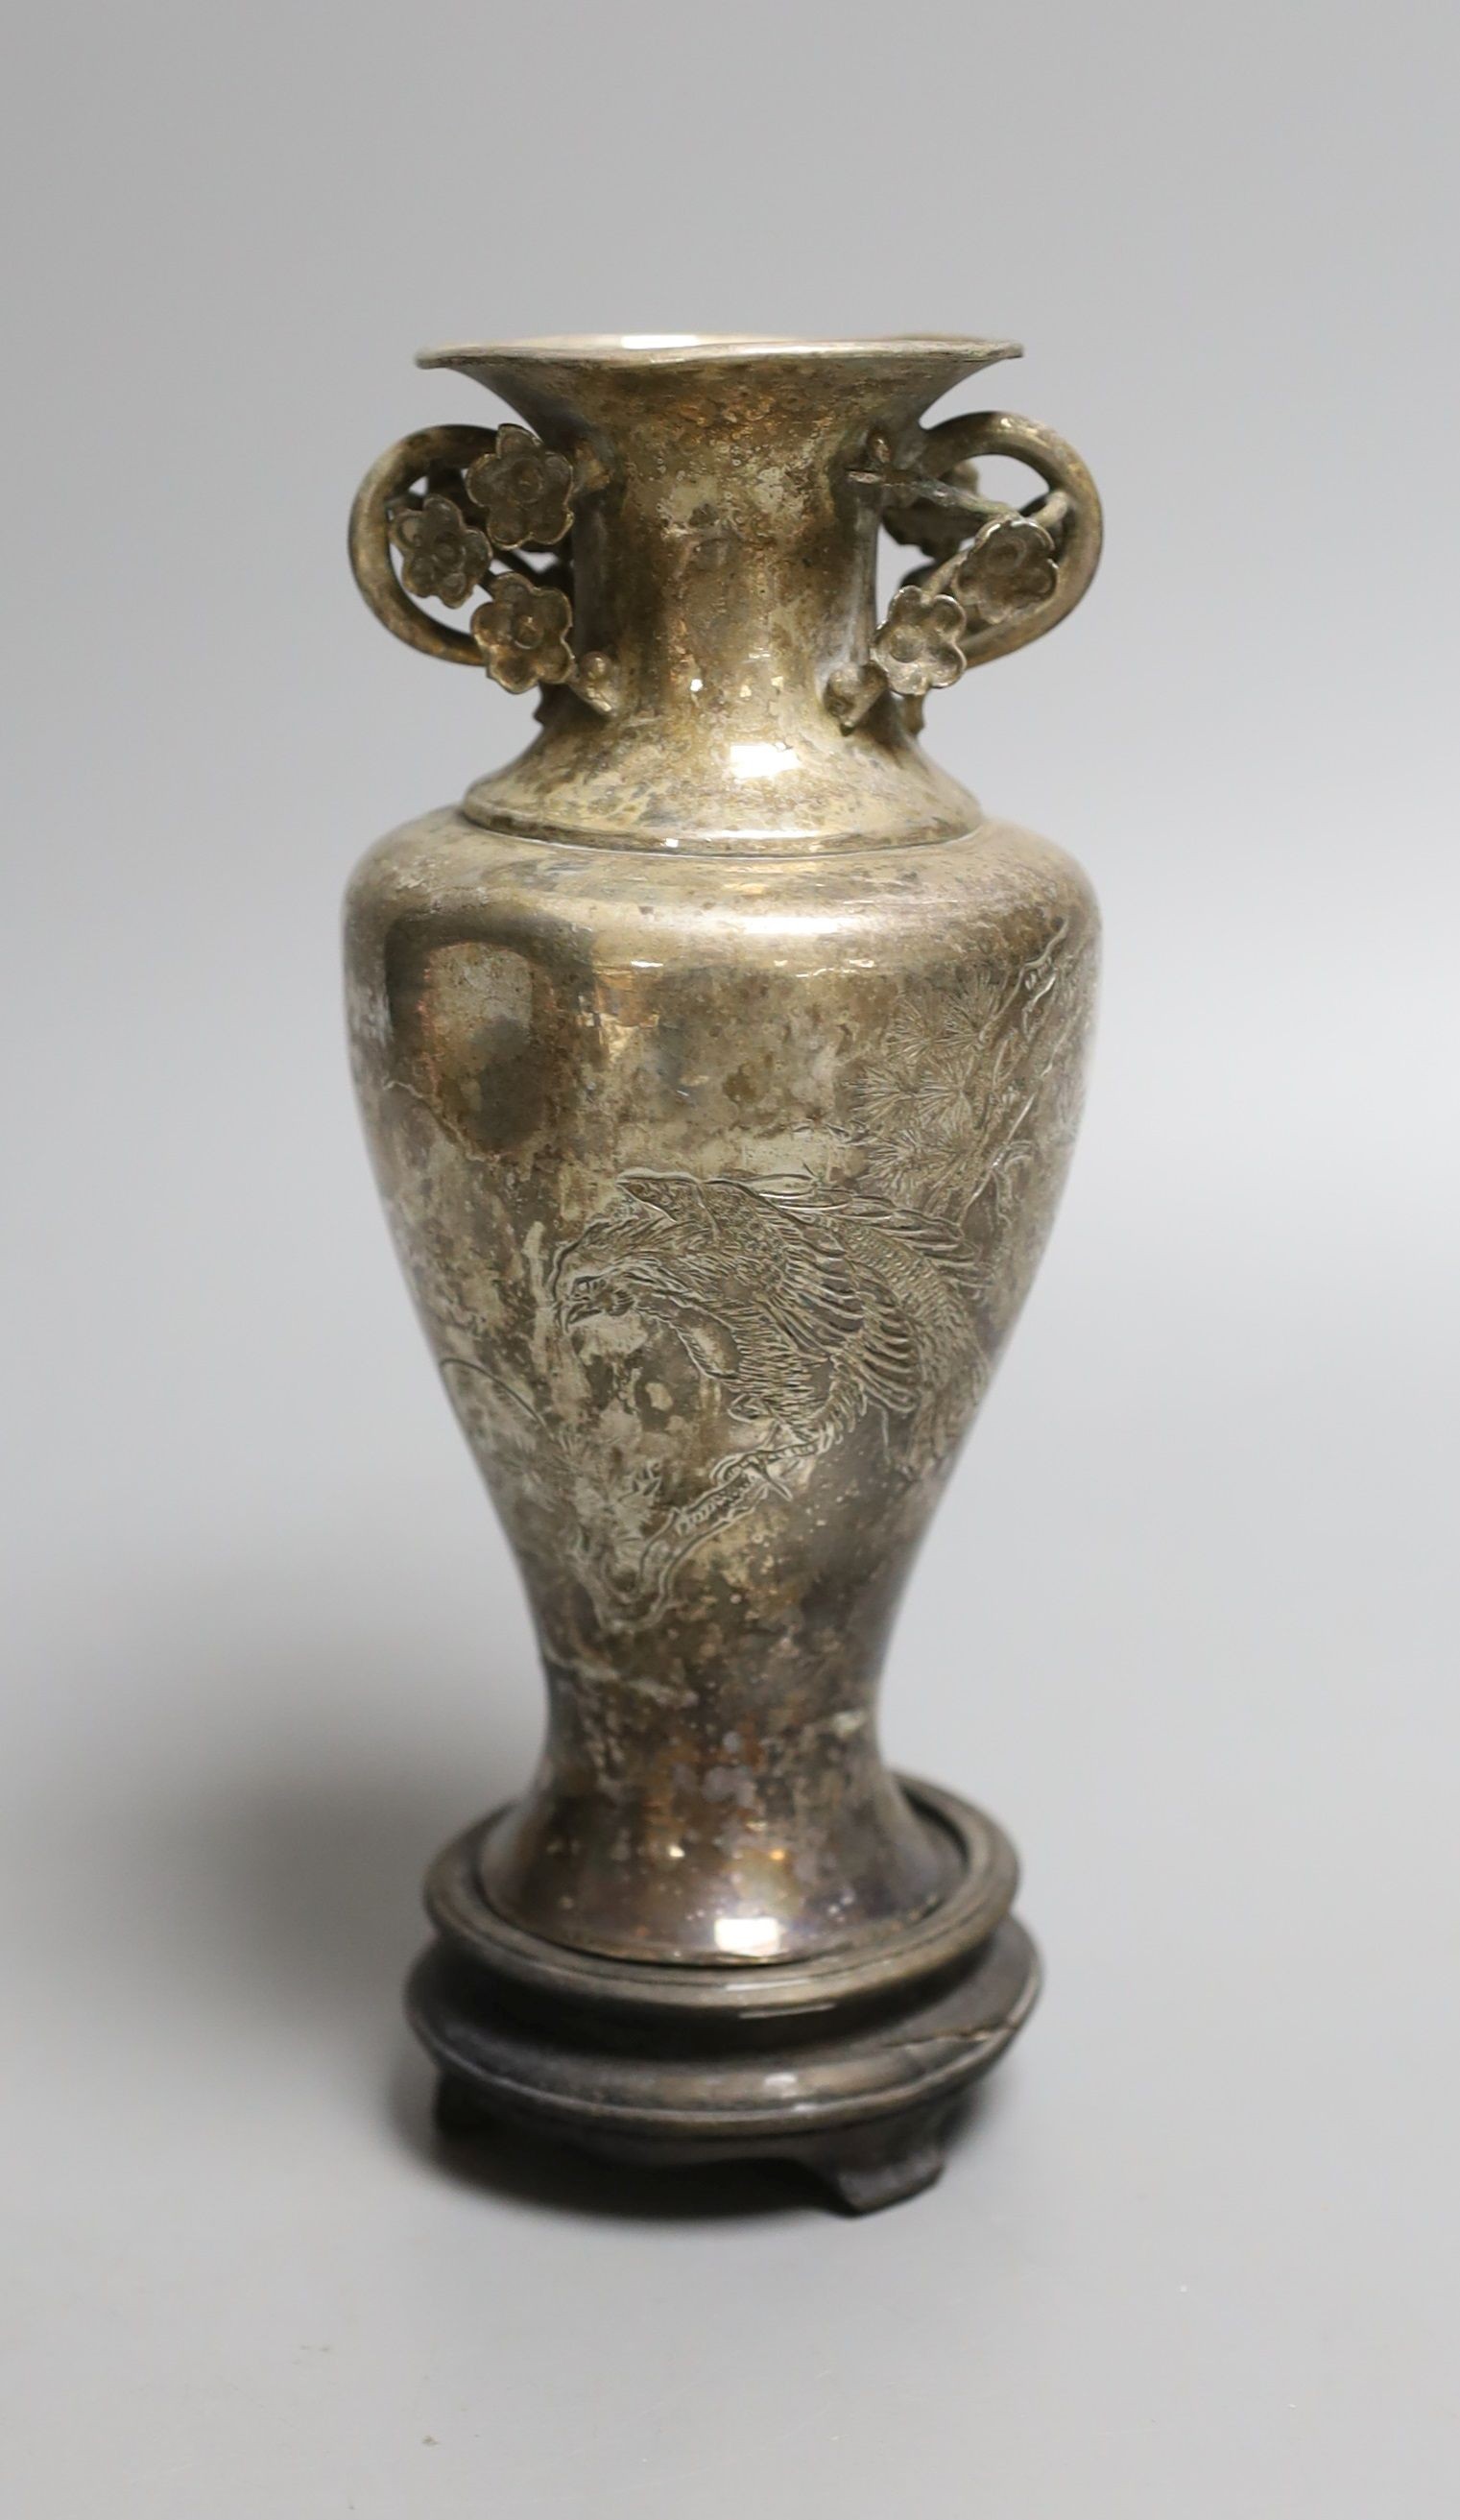 An early 20th century Chines engraved white metal two handled vase, on a wooden stand, vase 13.5cm.